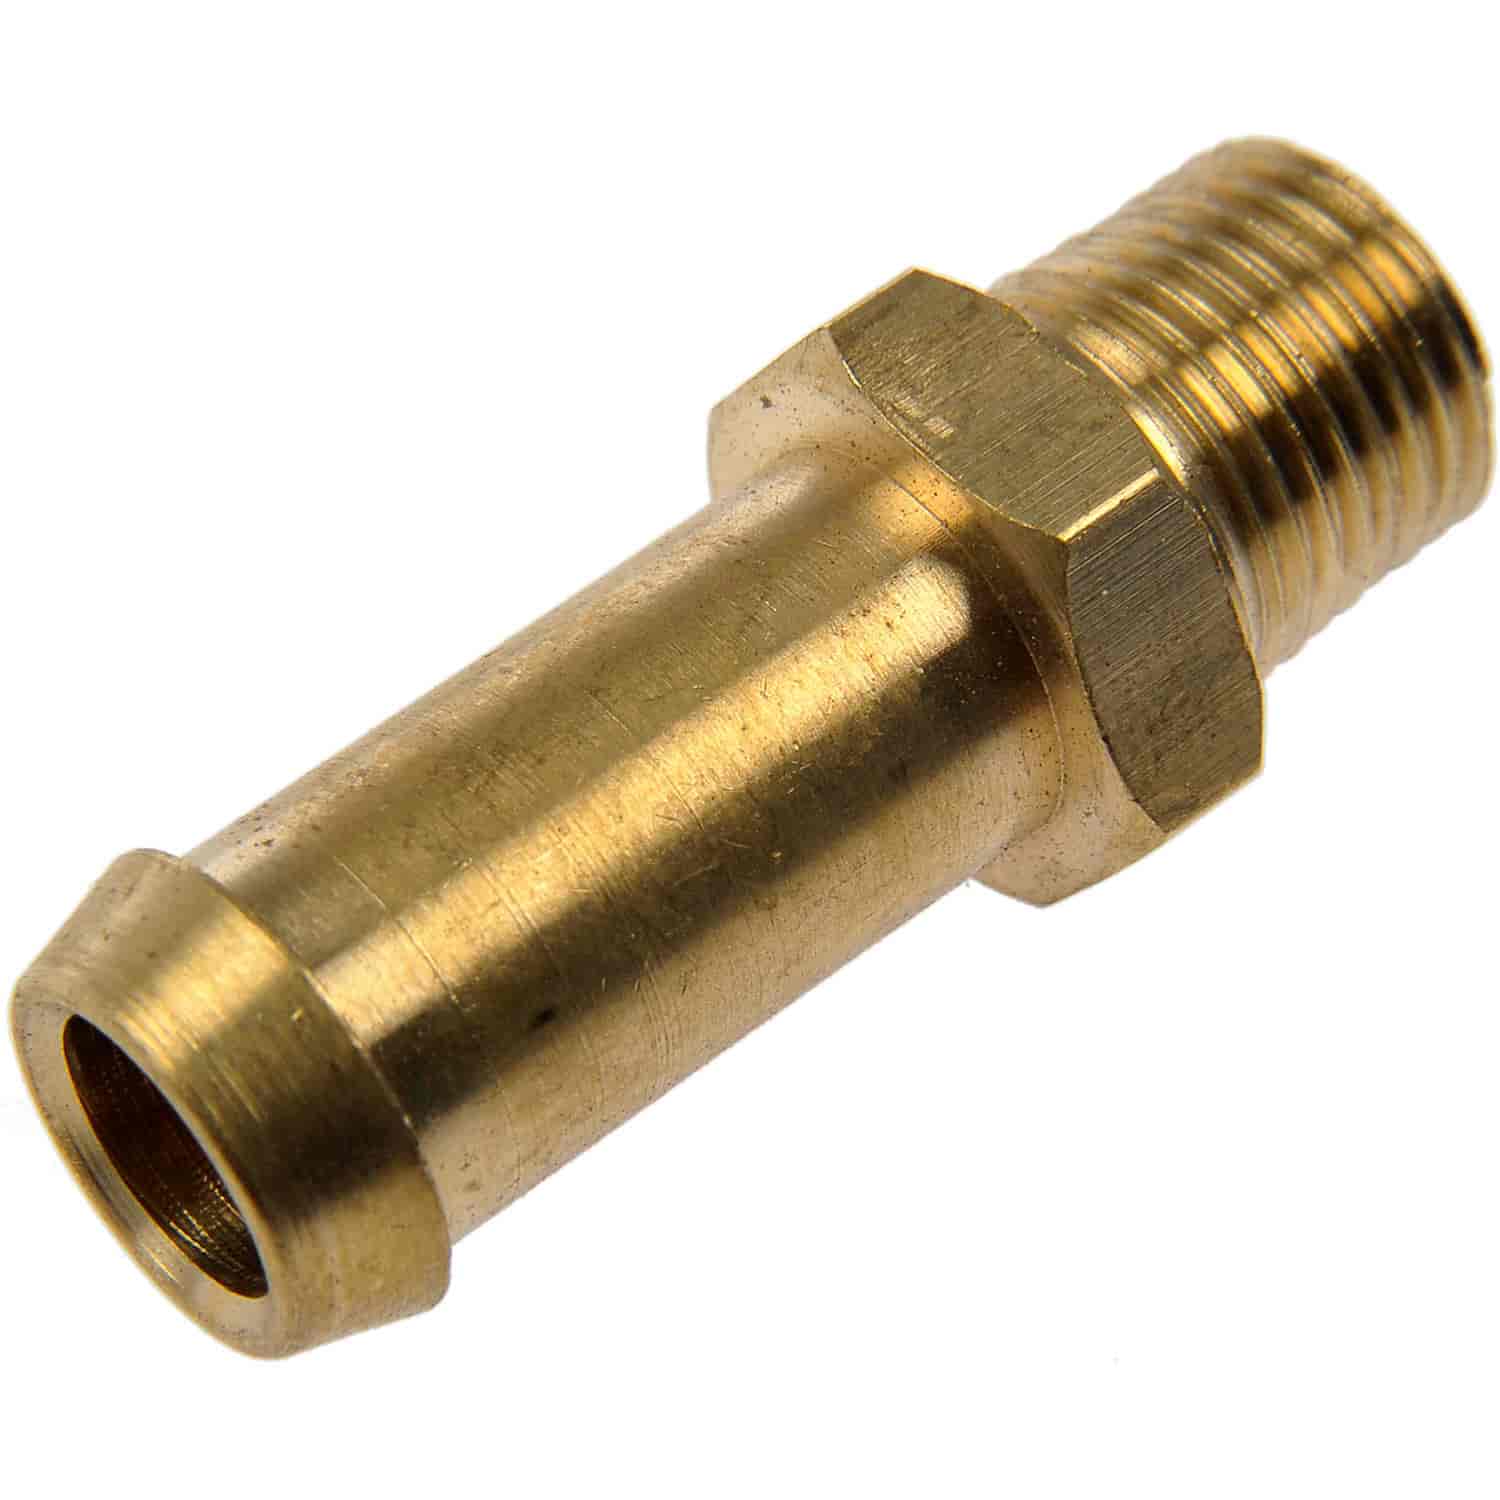 Fuel Hose Fitting-Male Connector-3/8 In. x 1/8 In. MNPT